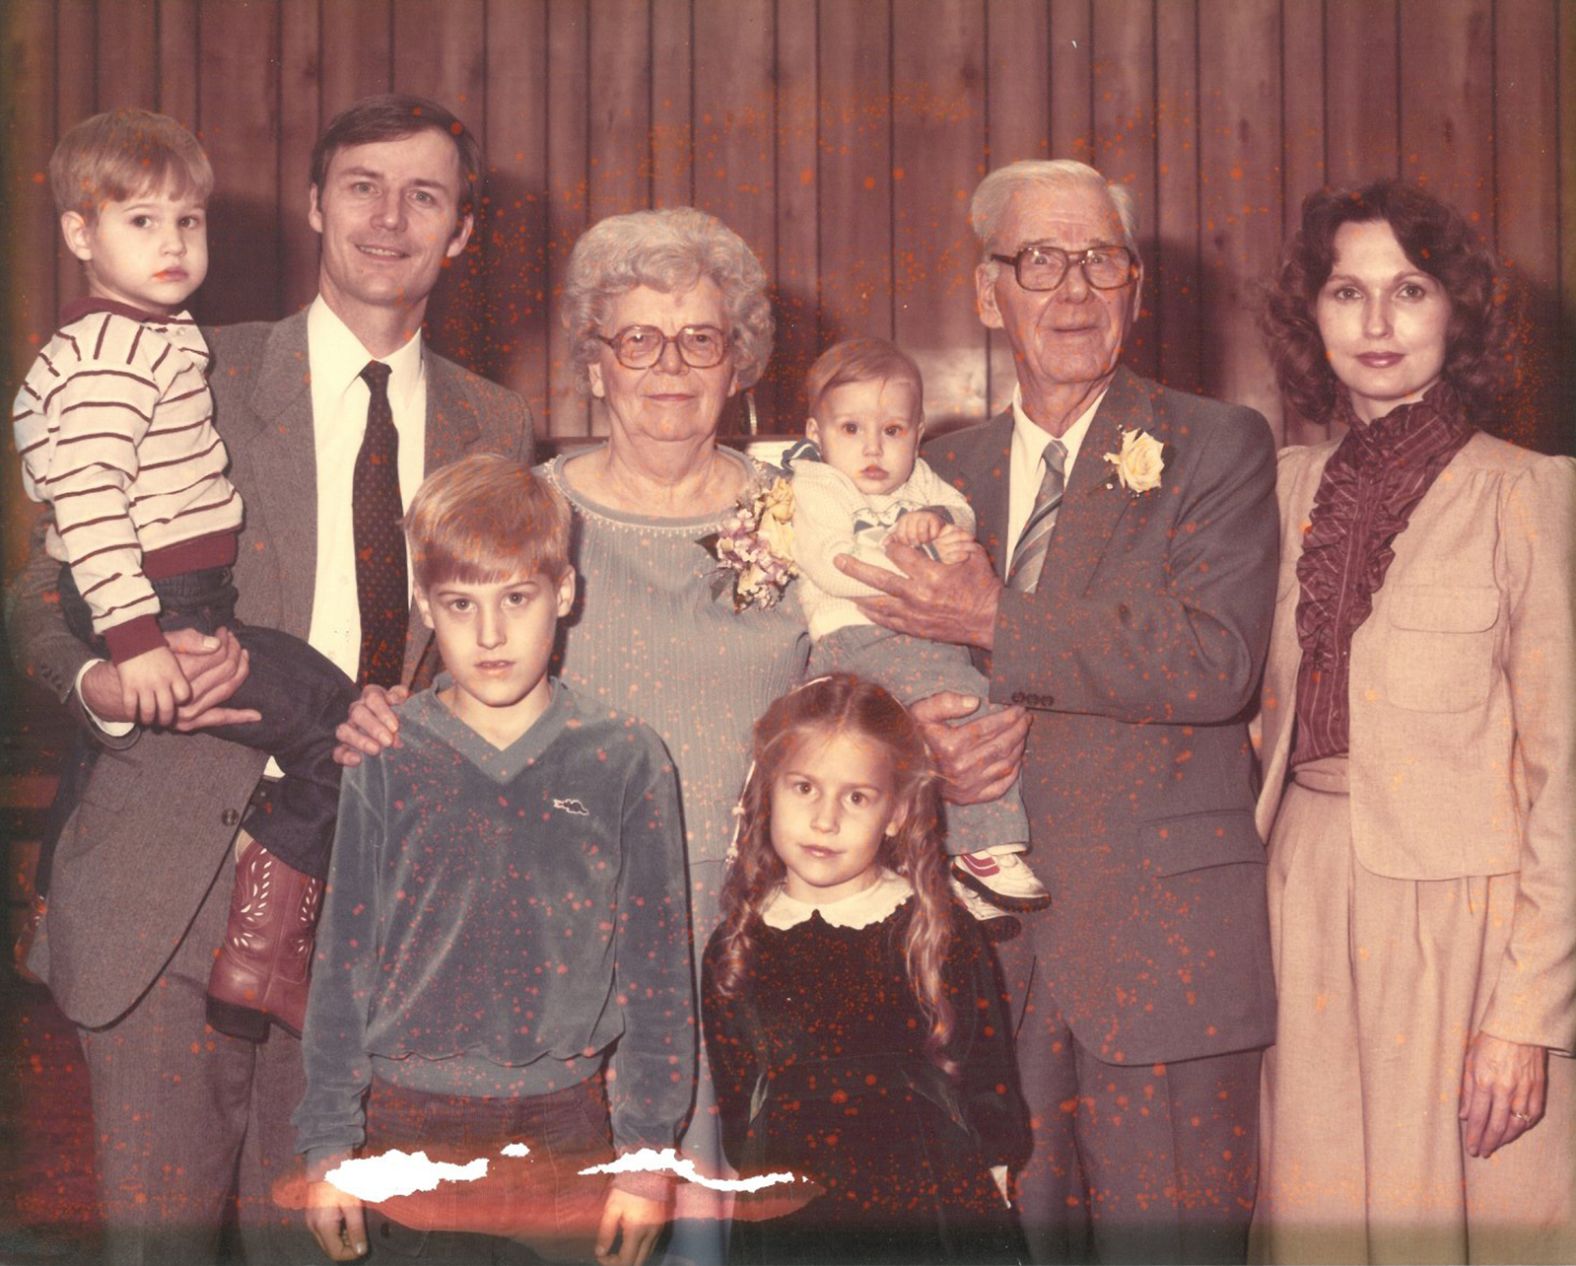 Hutchinson, second from left, poses for a family photo with his parents, wife and four children. President Ronald Reagan tapped Hutchinson to be the US attorney for the Western District of Arkansas in 1982, making him the youngest federal prosecutor at the time at 31. He served in that role until 1985.